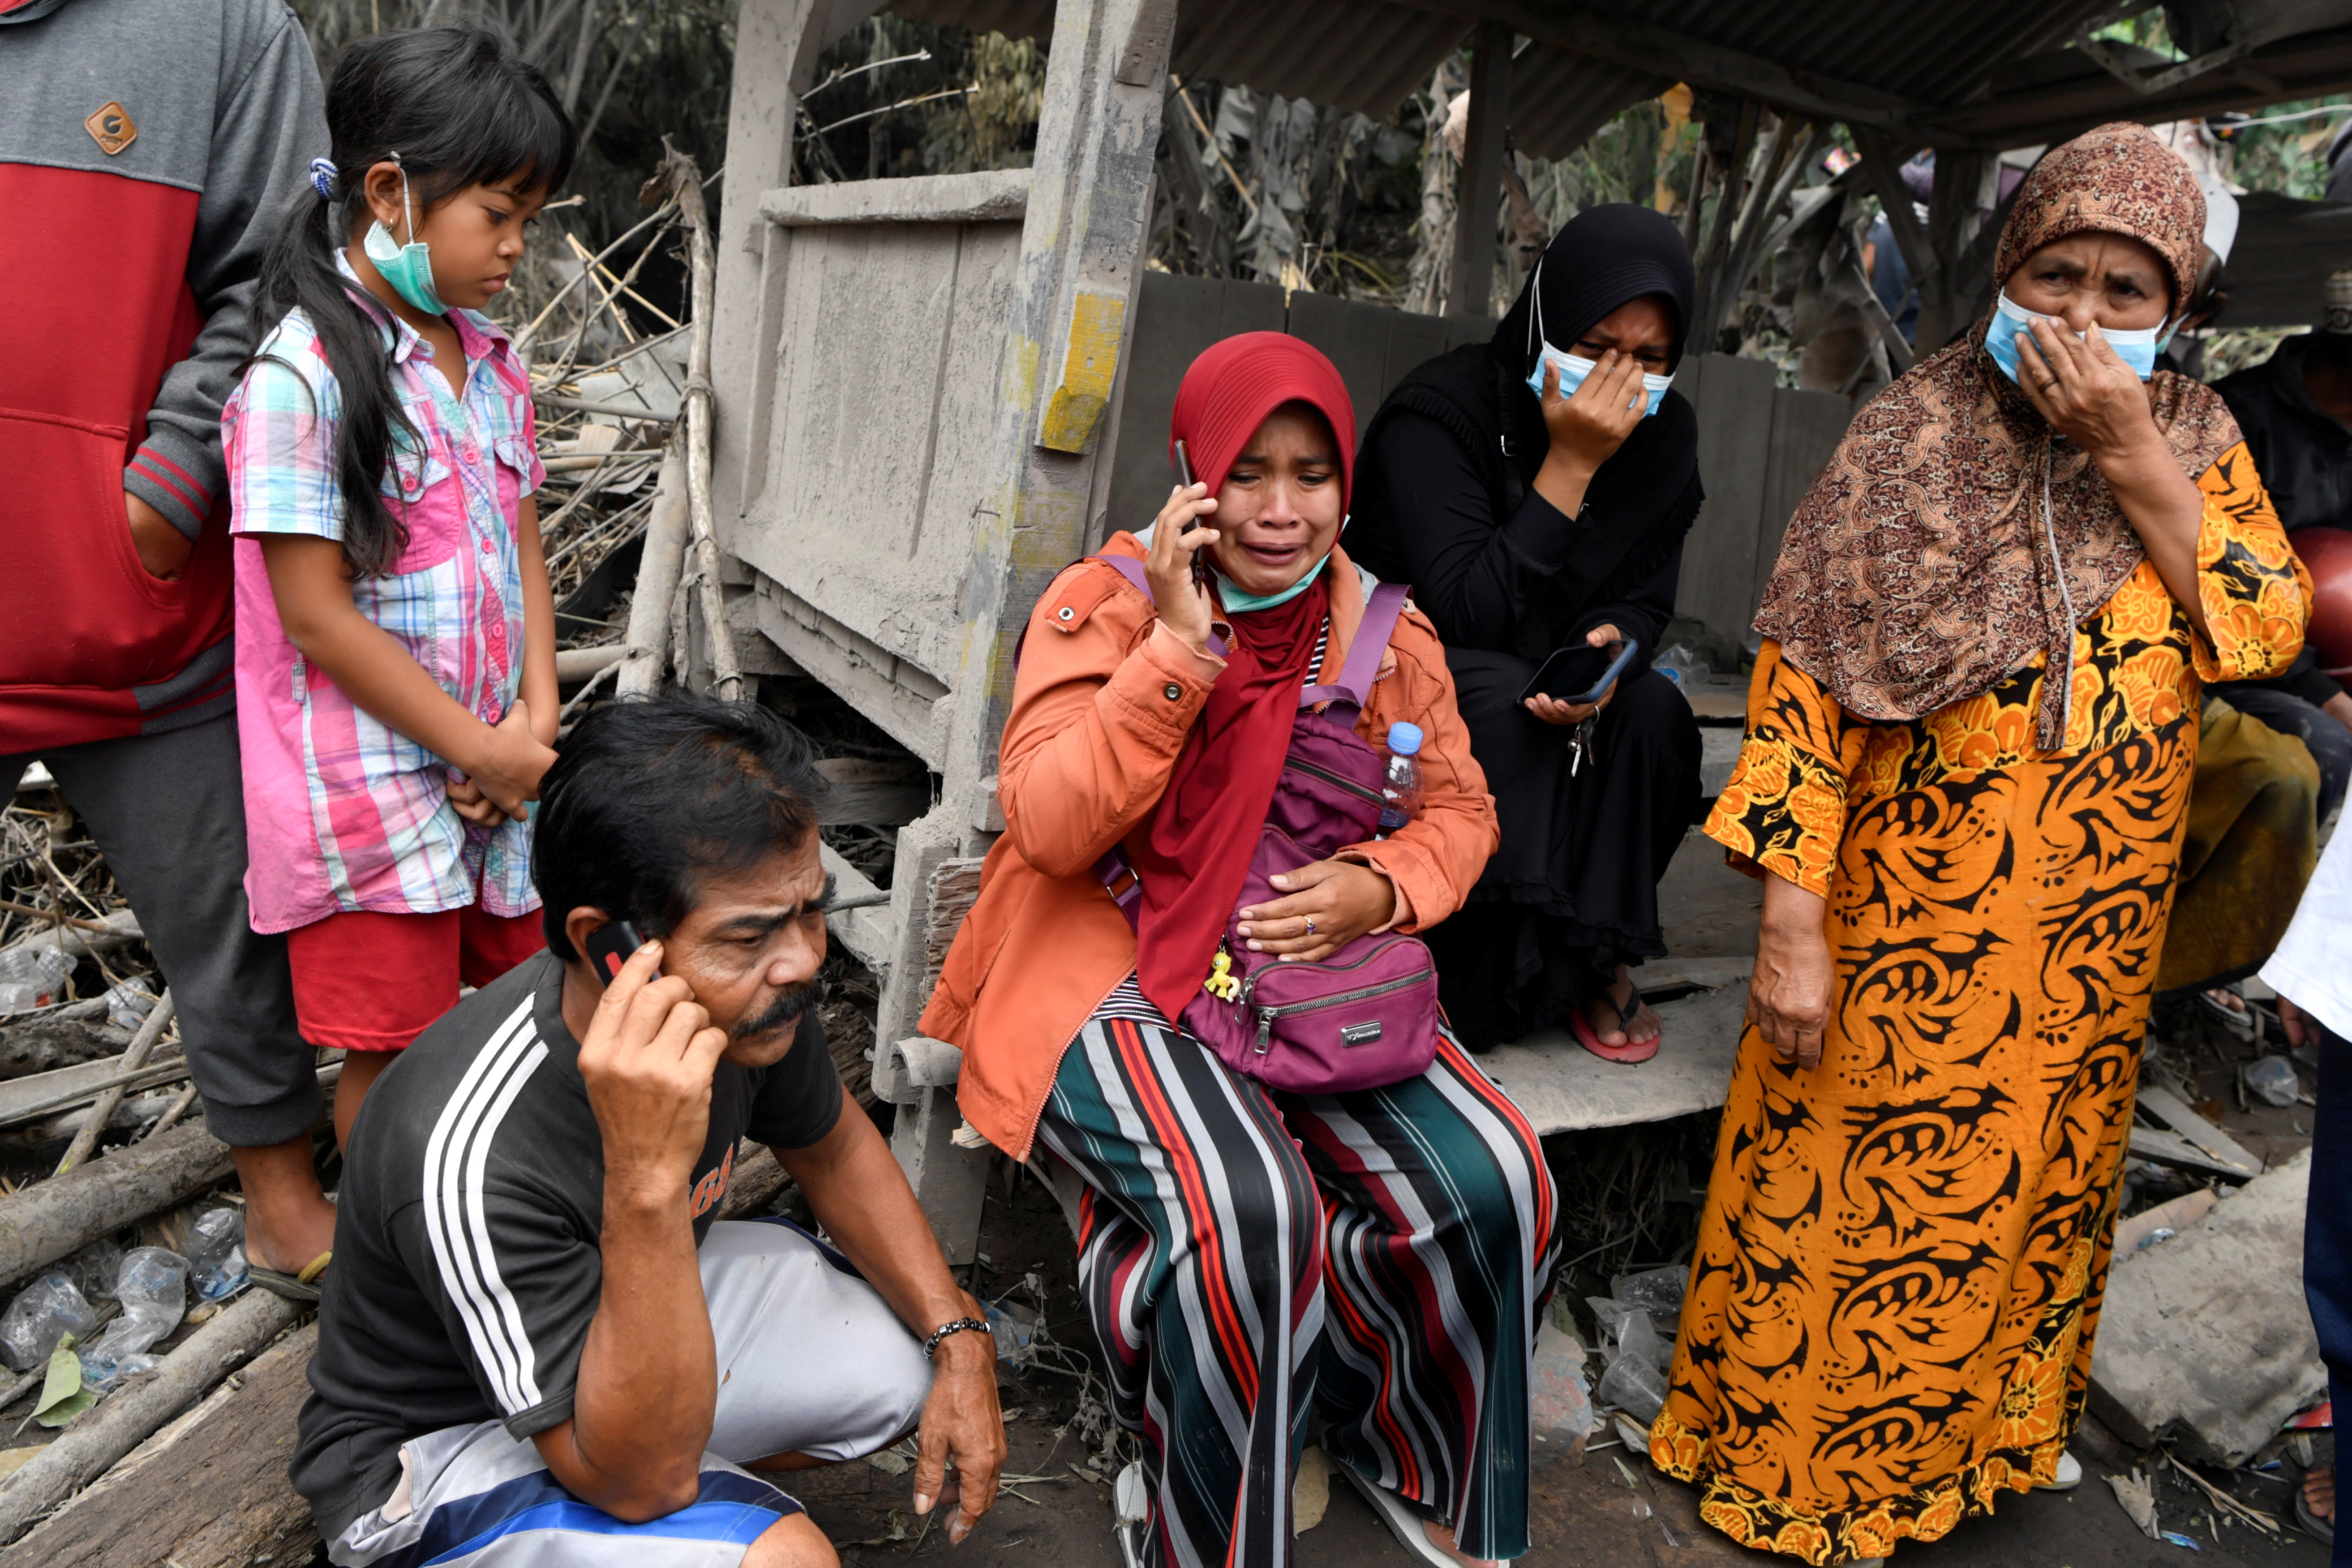 Families of the victims of the Mount Semeru volcano eruption react as they wait for information in Sumber Wuluh